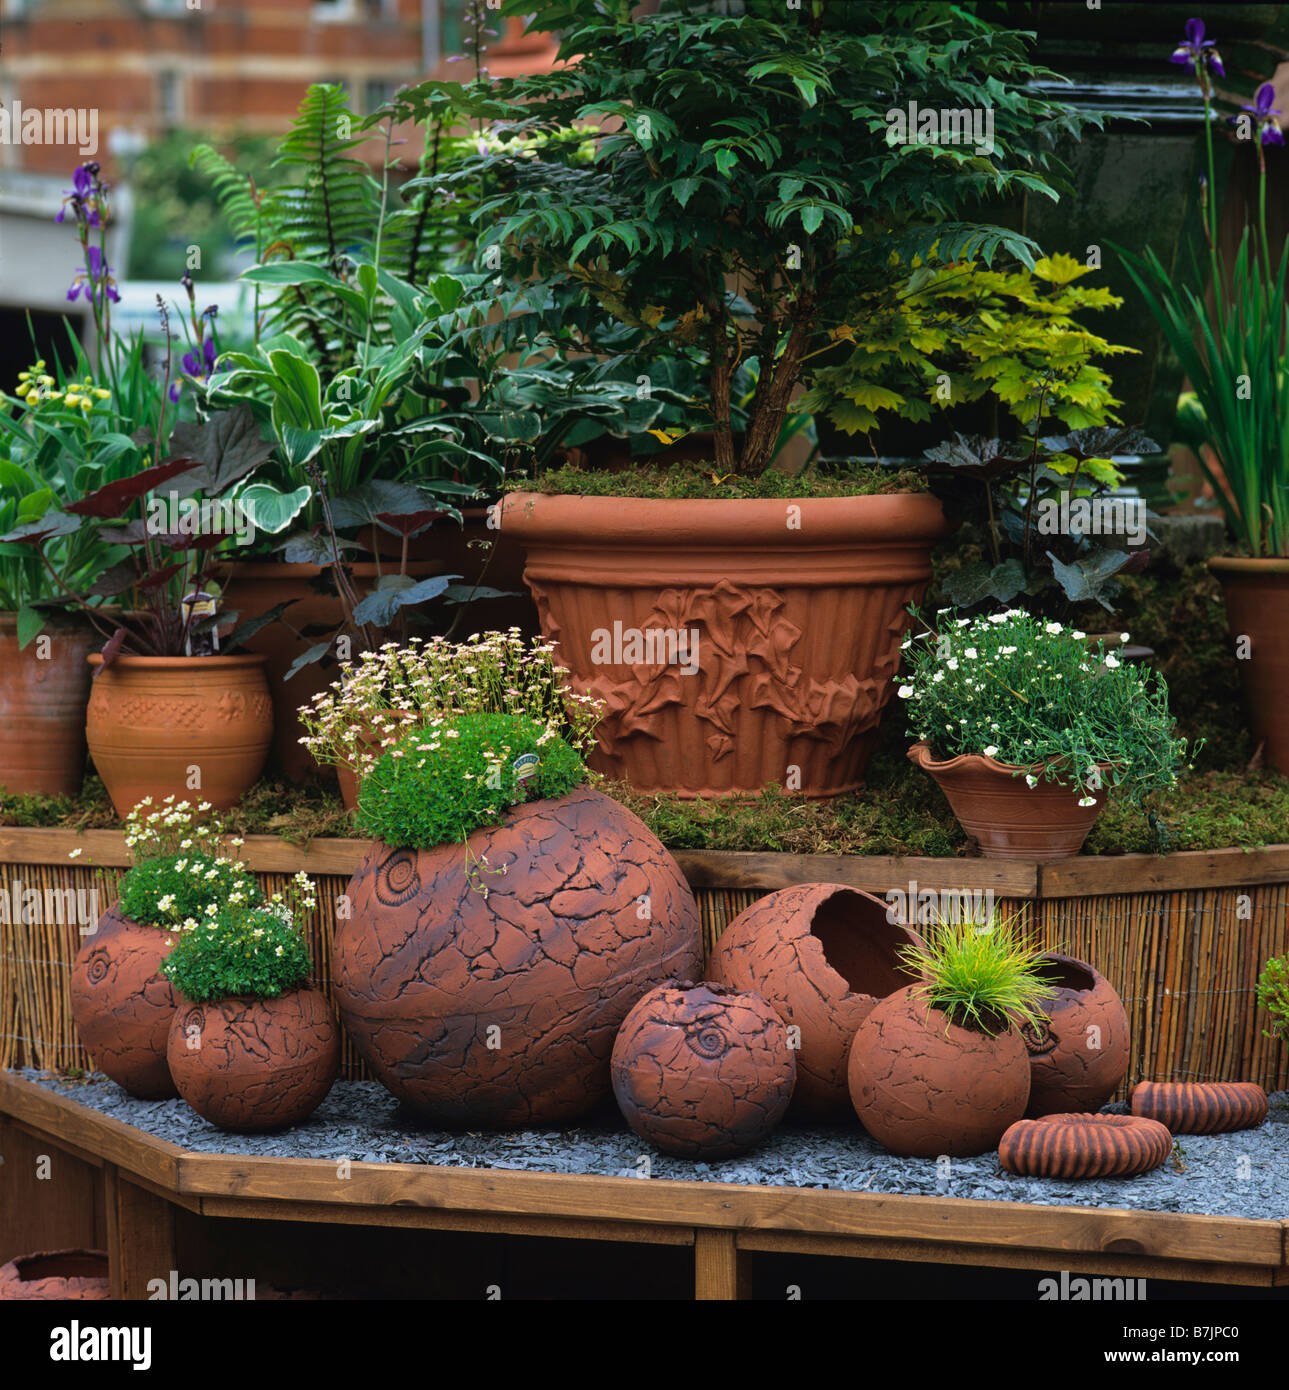 Planted containers and terracotta display Stock Photo